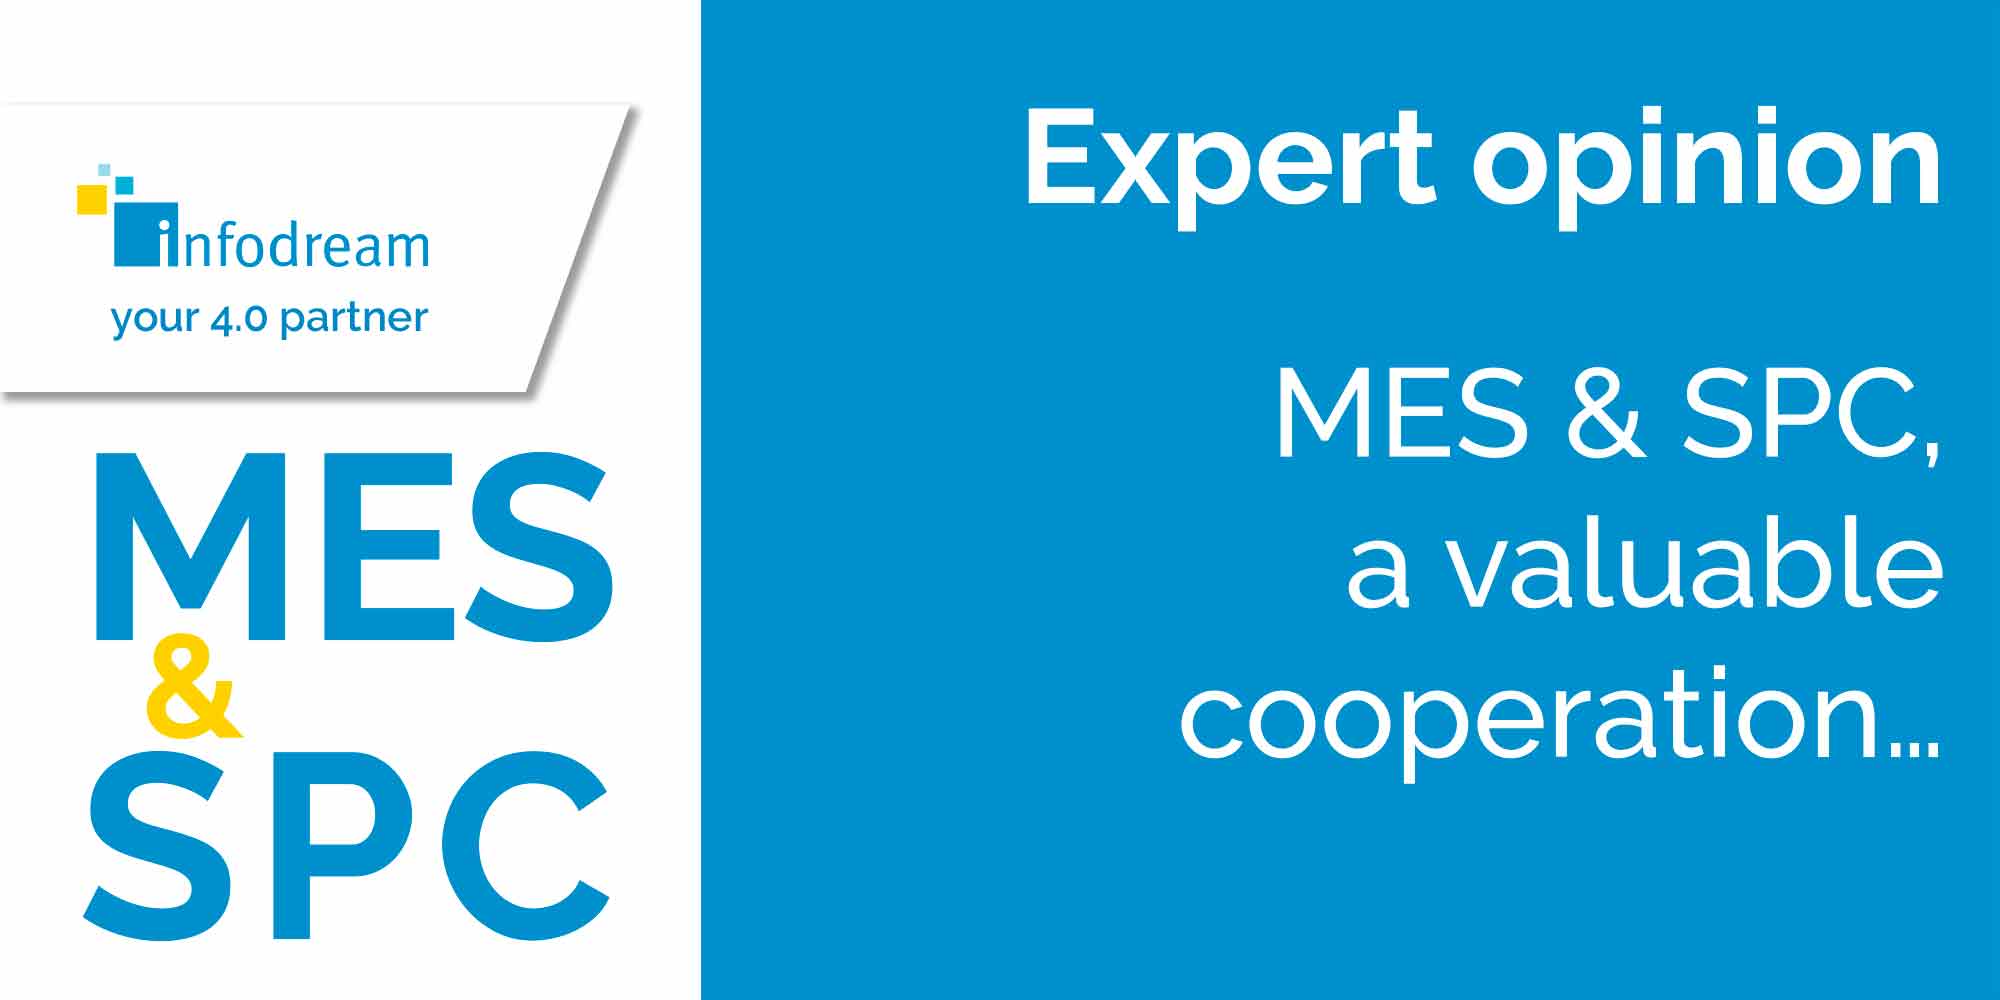 MES & SPC, A Valuable Cooperation